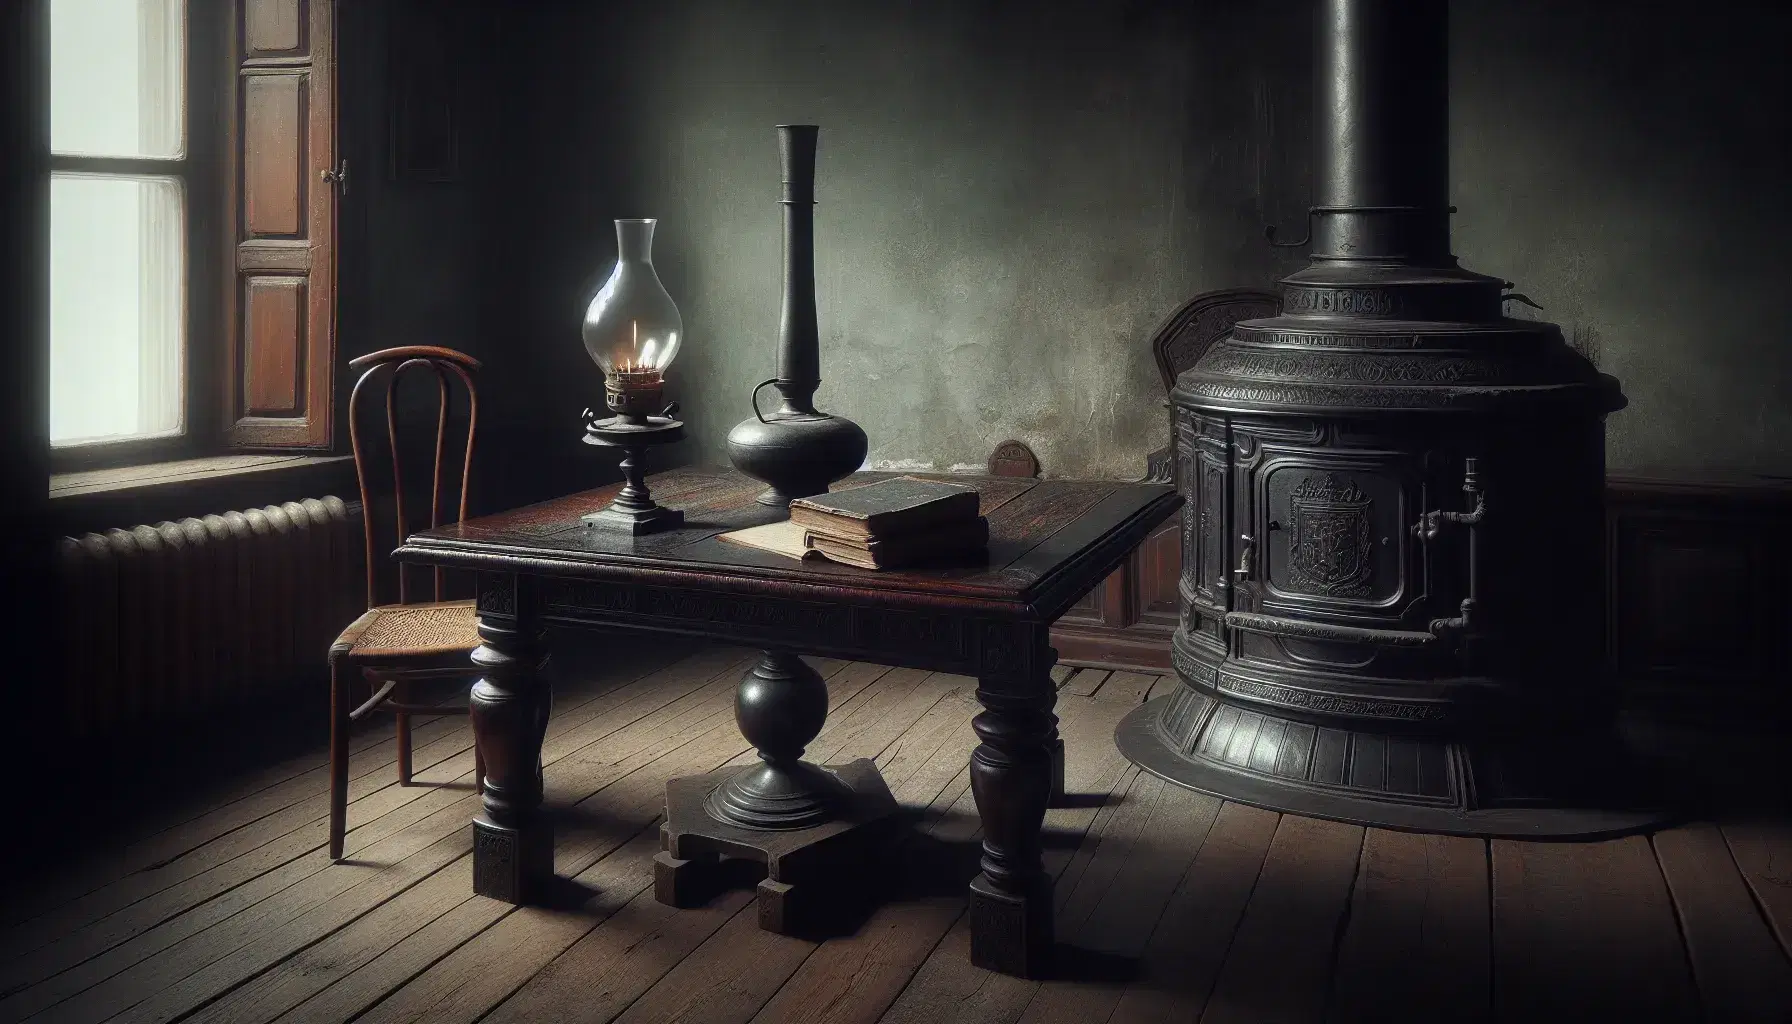 Dimly lit 19th-century Russian parlor with a carved mahogany table, unlit oil lamp, leather-bound book, woven rattan chair, and ornate cast-iron stove.